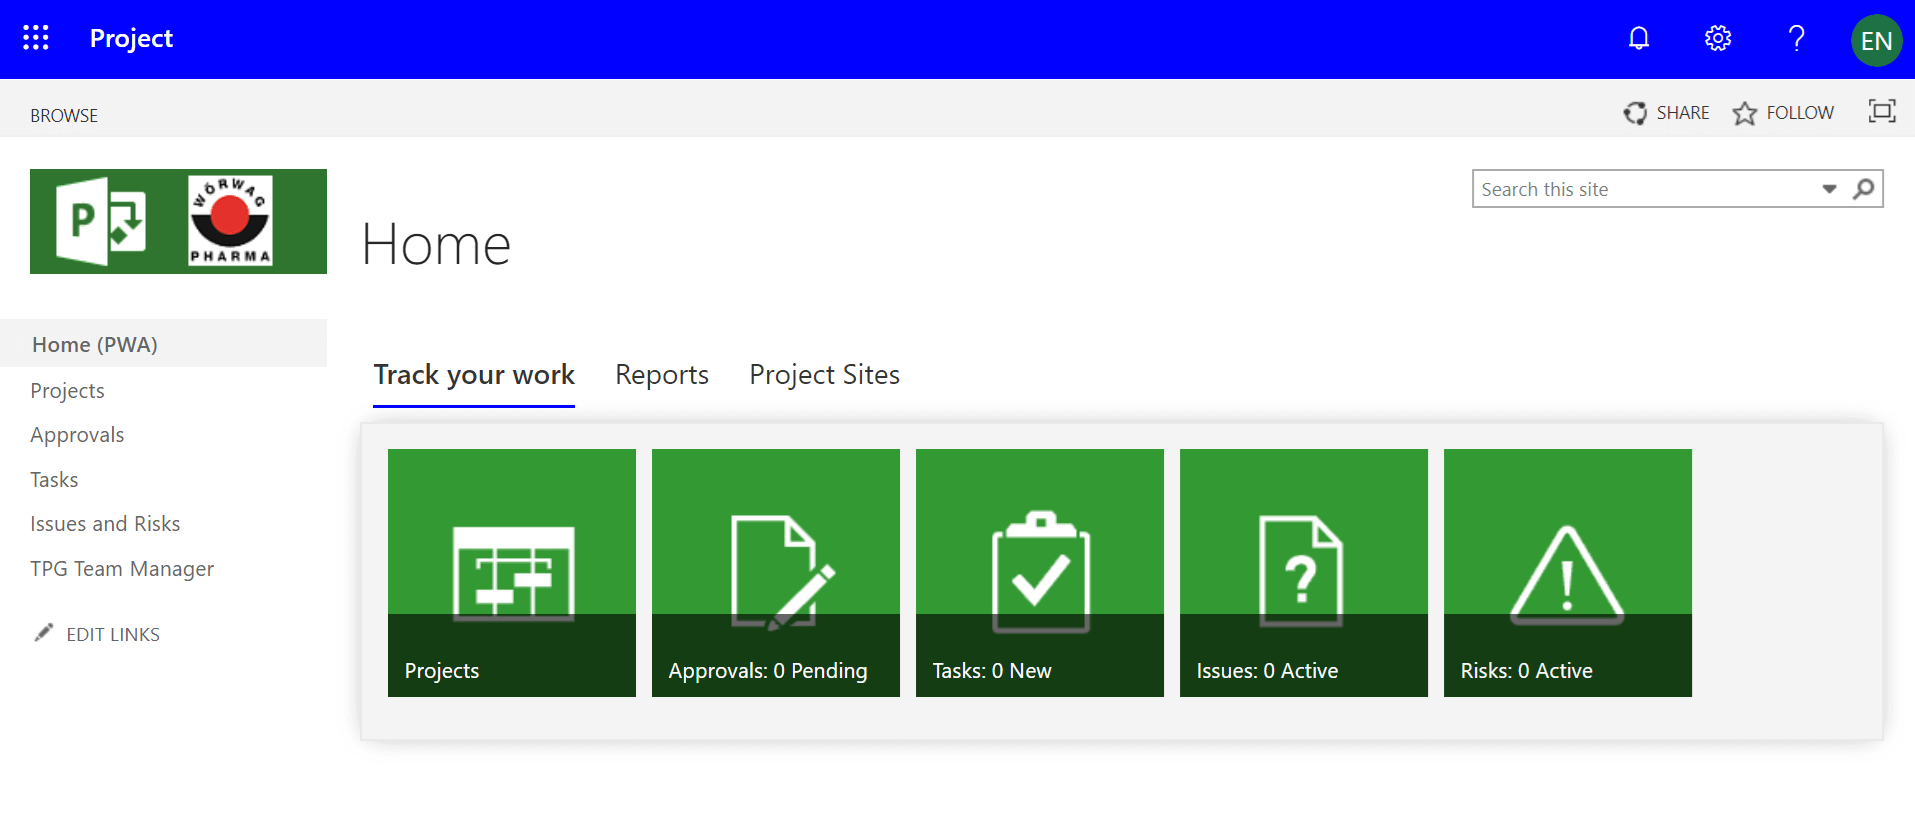 Project Online Case Study: Microsoft Project user interface